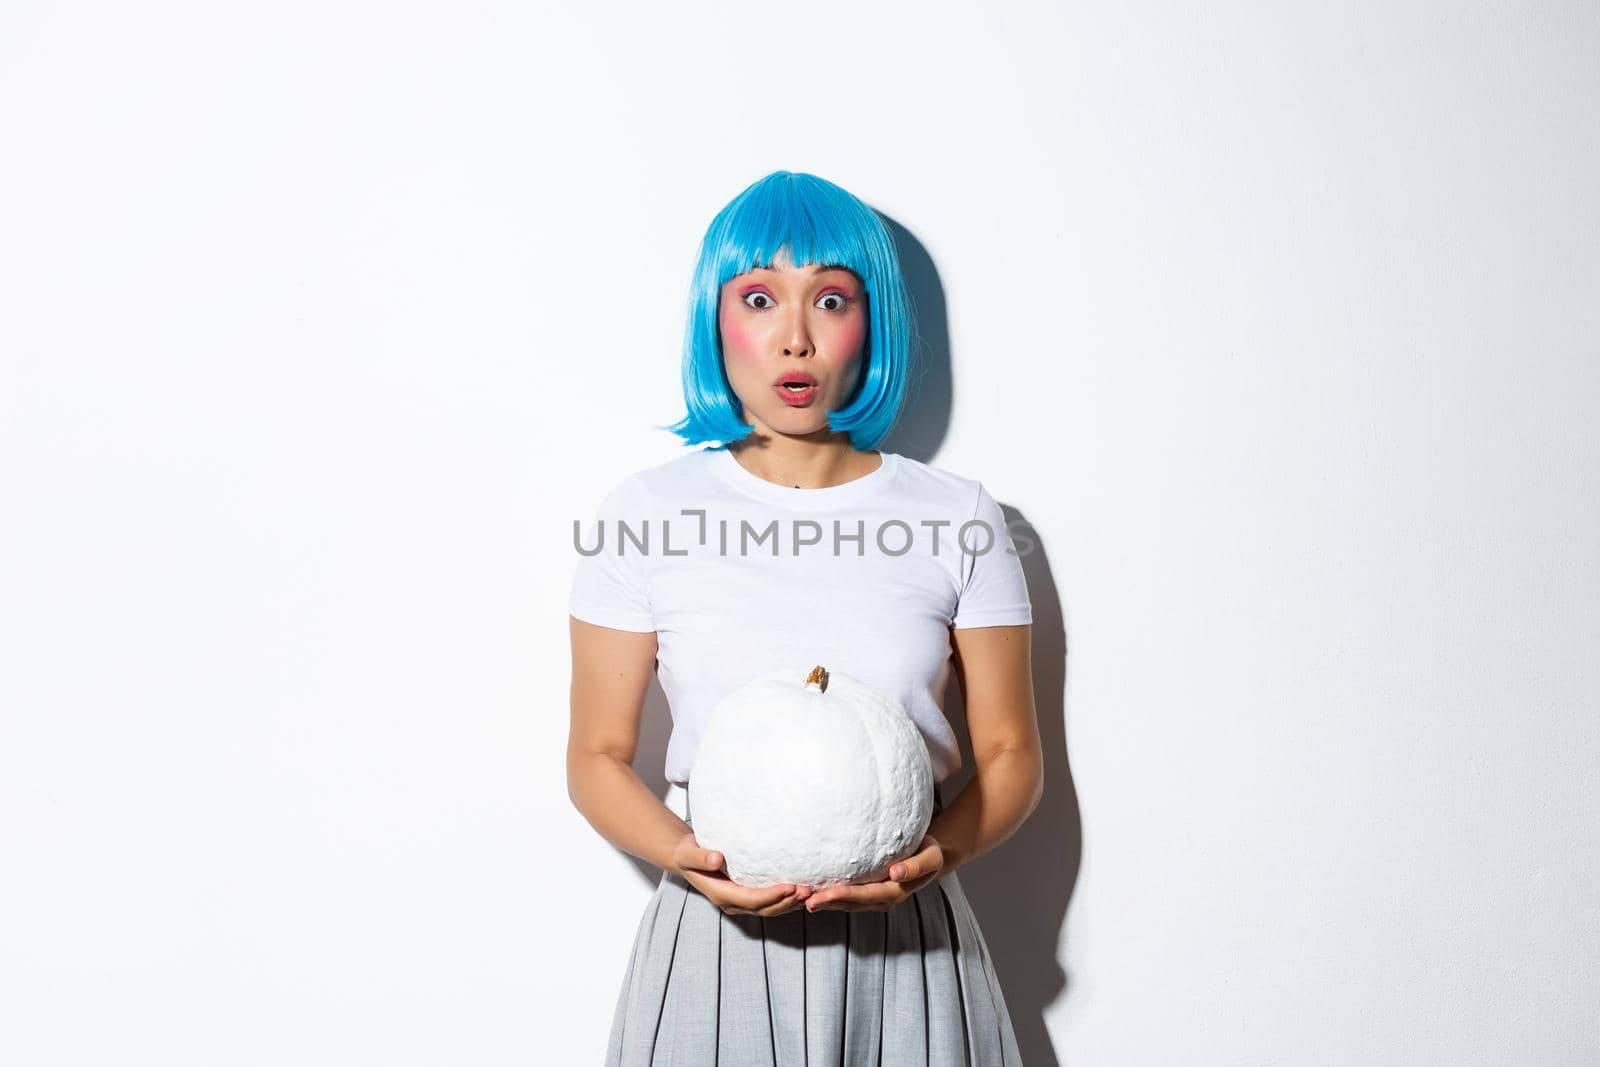 Image of asian girl in blue wig looking surprised and gasping, holding white pumpkin, standing over white background.